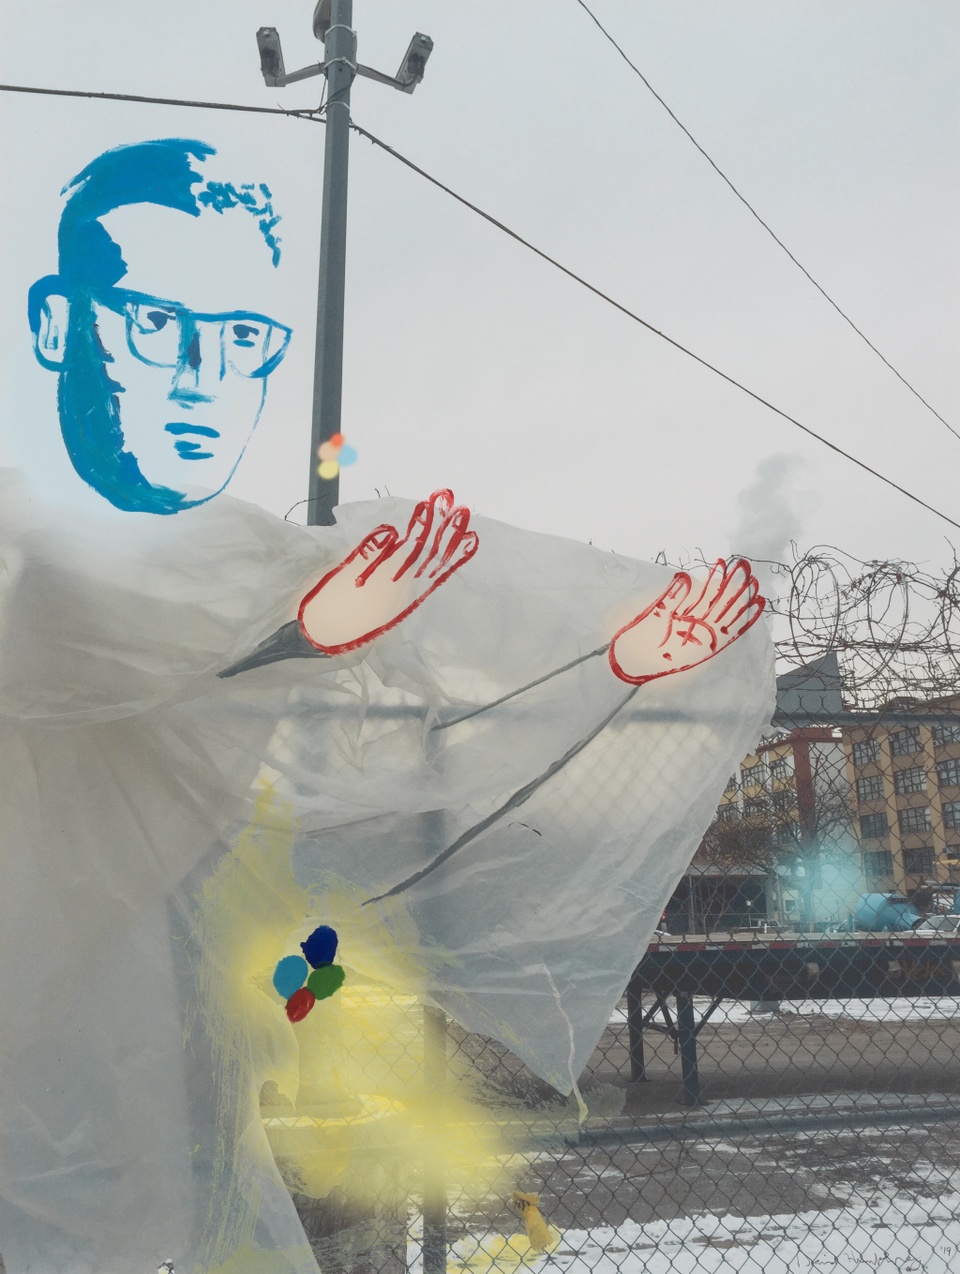 Image of a figure with glasses holding their hands out in front of an urban backdrop